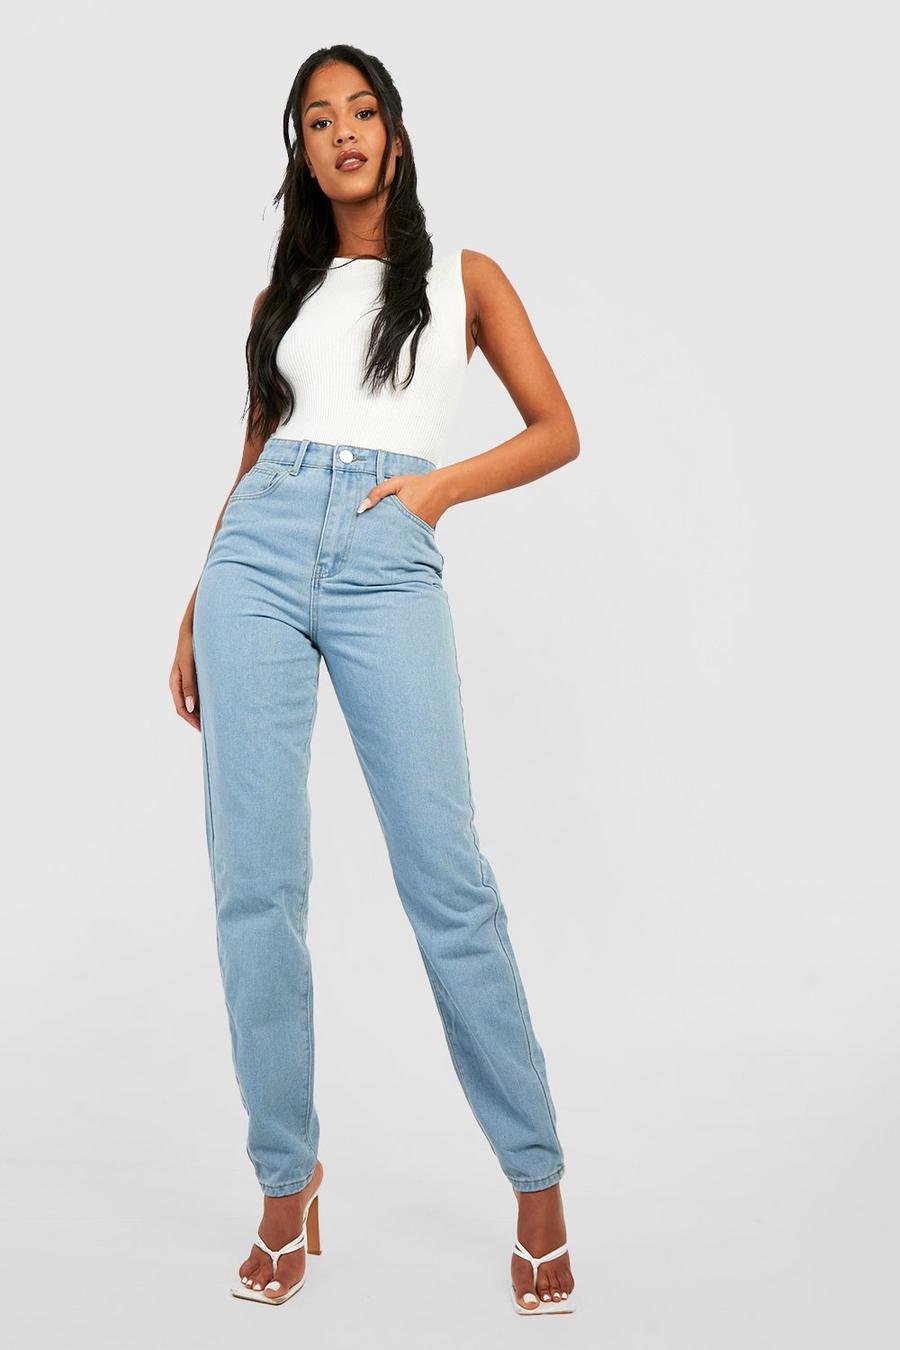 Jeans Ladies High Waist Mom Jeans Denim Jeans Trousers Used